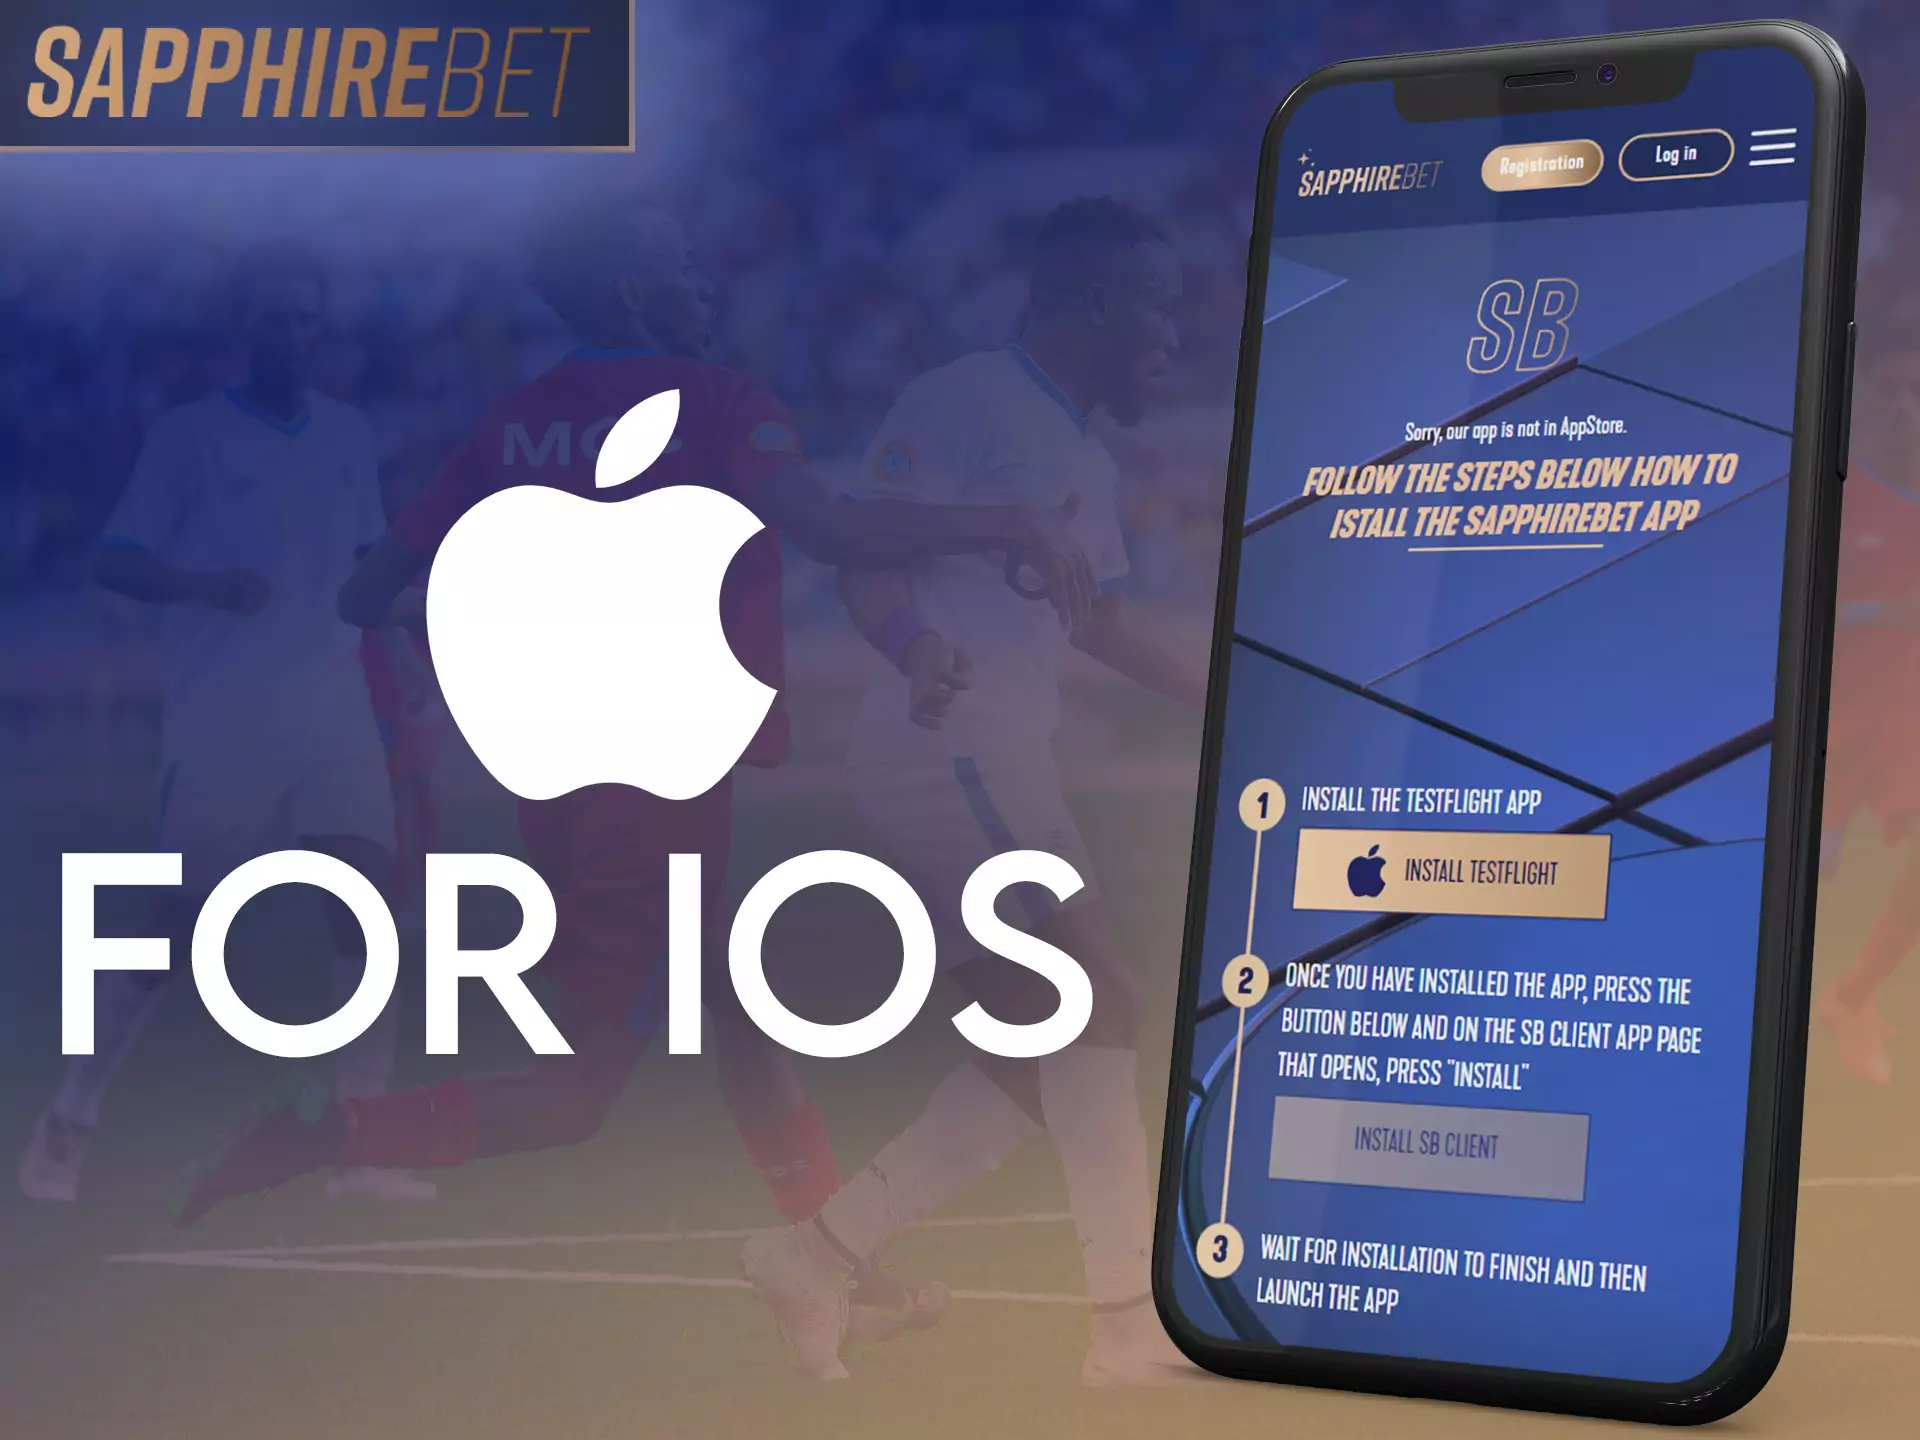 You can use the Sapphirebet app on your iOS device.